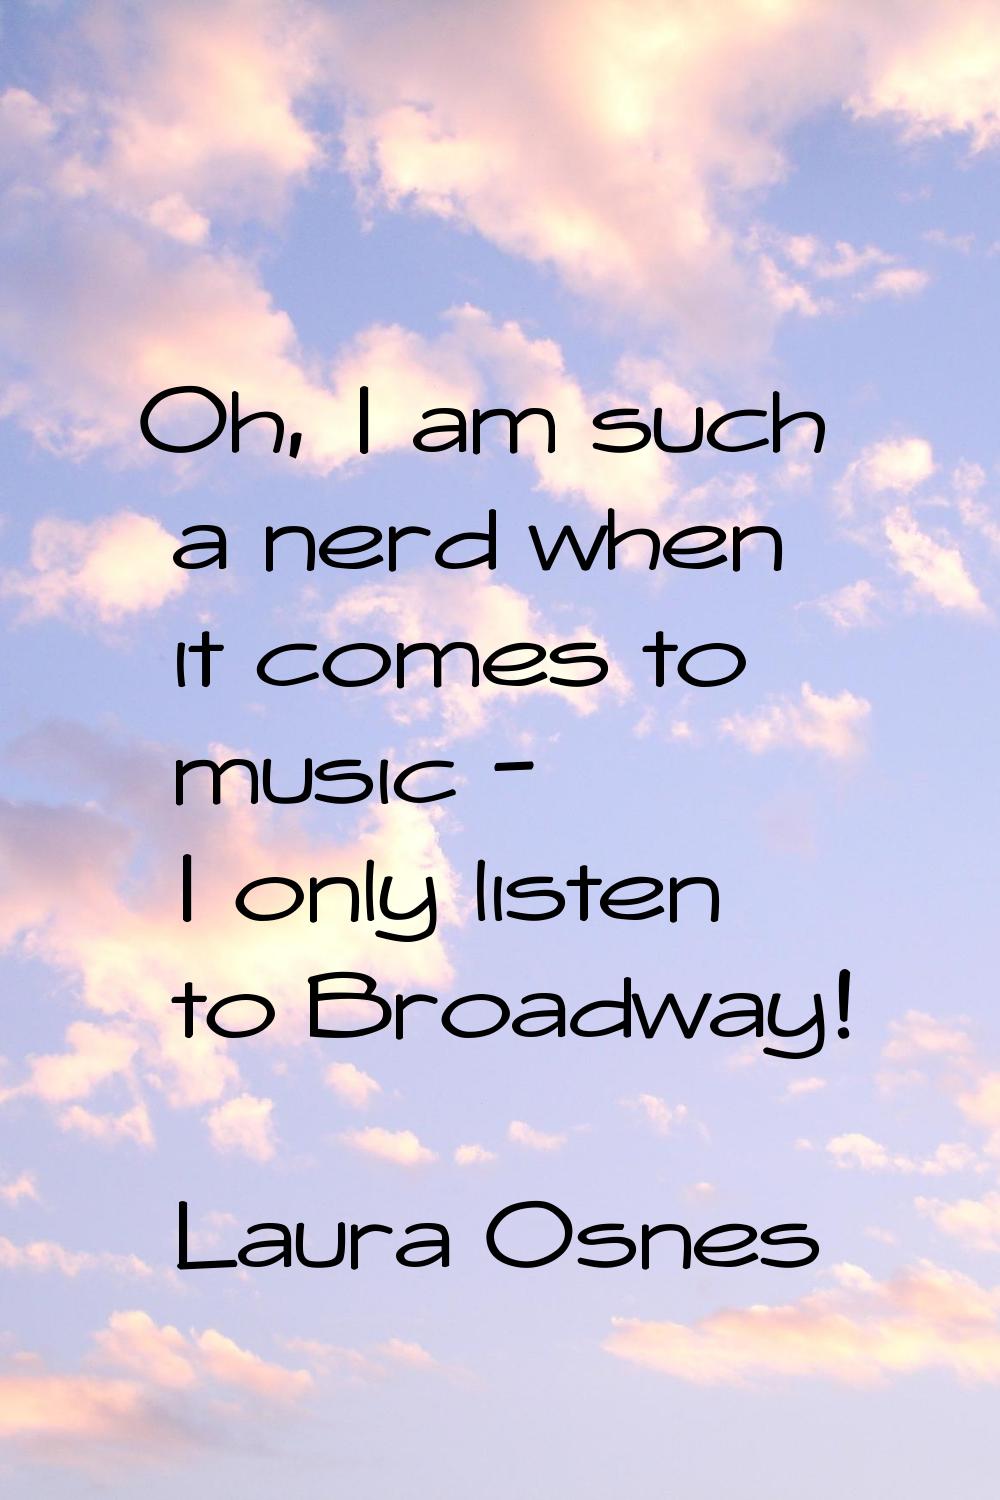 Oh, I am such a nerd when it comes to music - I only listen to Broadway!